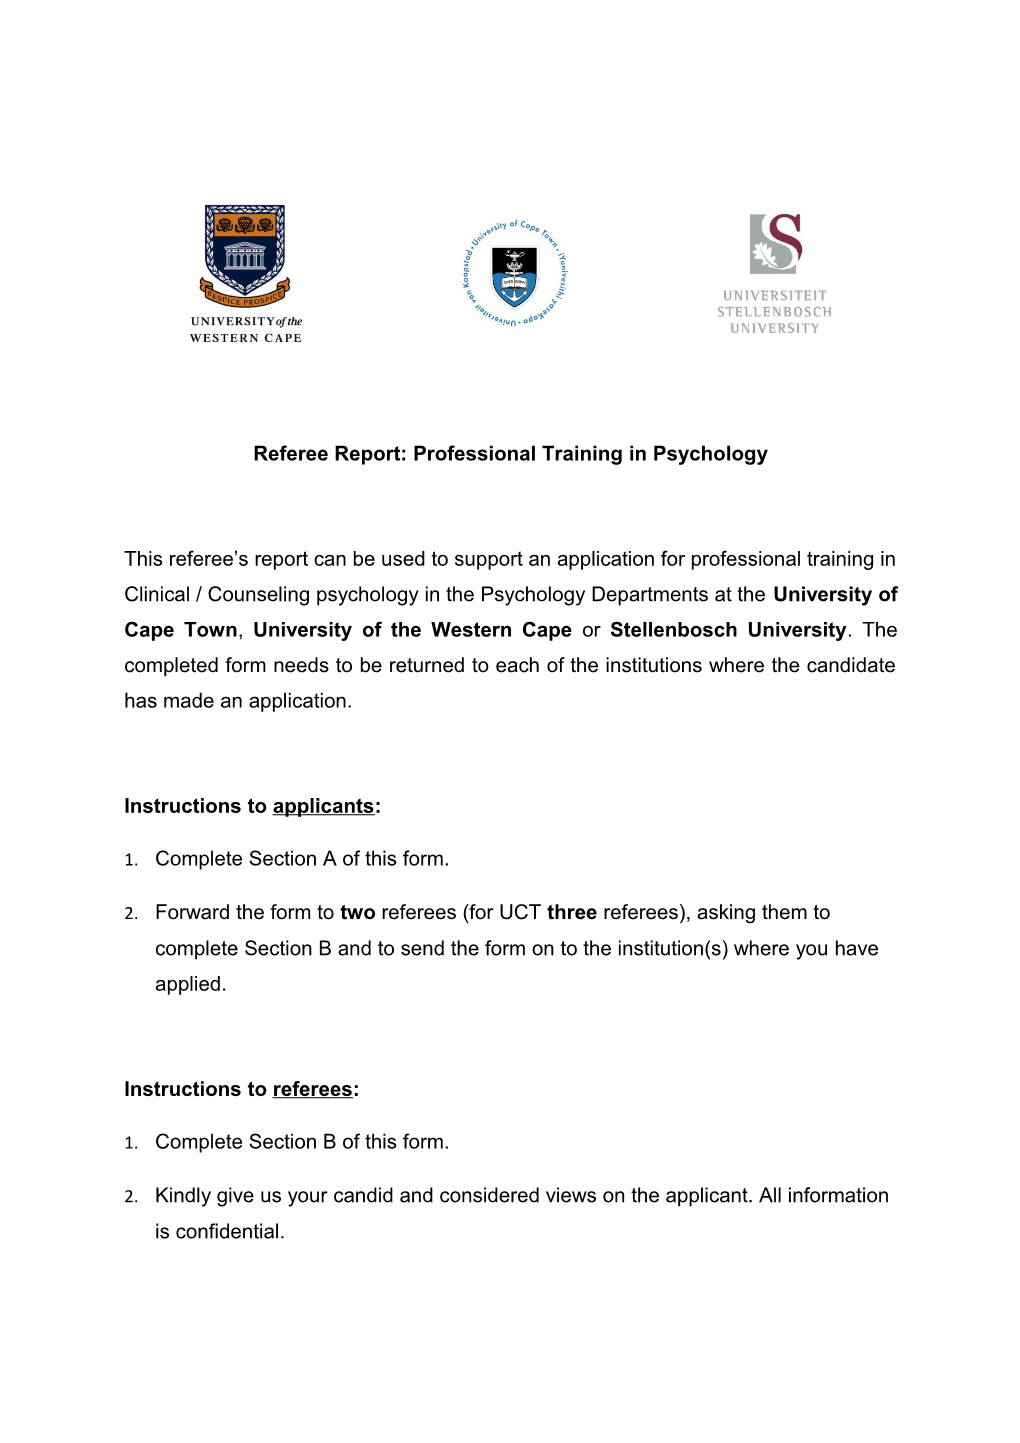 Referee Report: Professional Training in Psychology